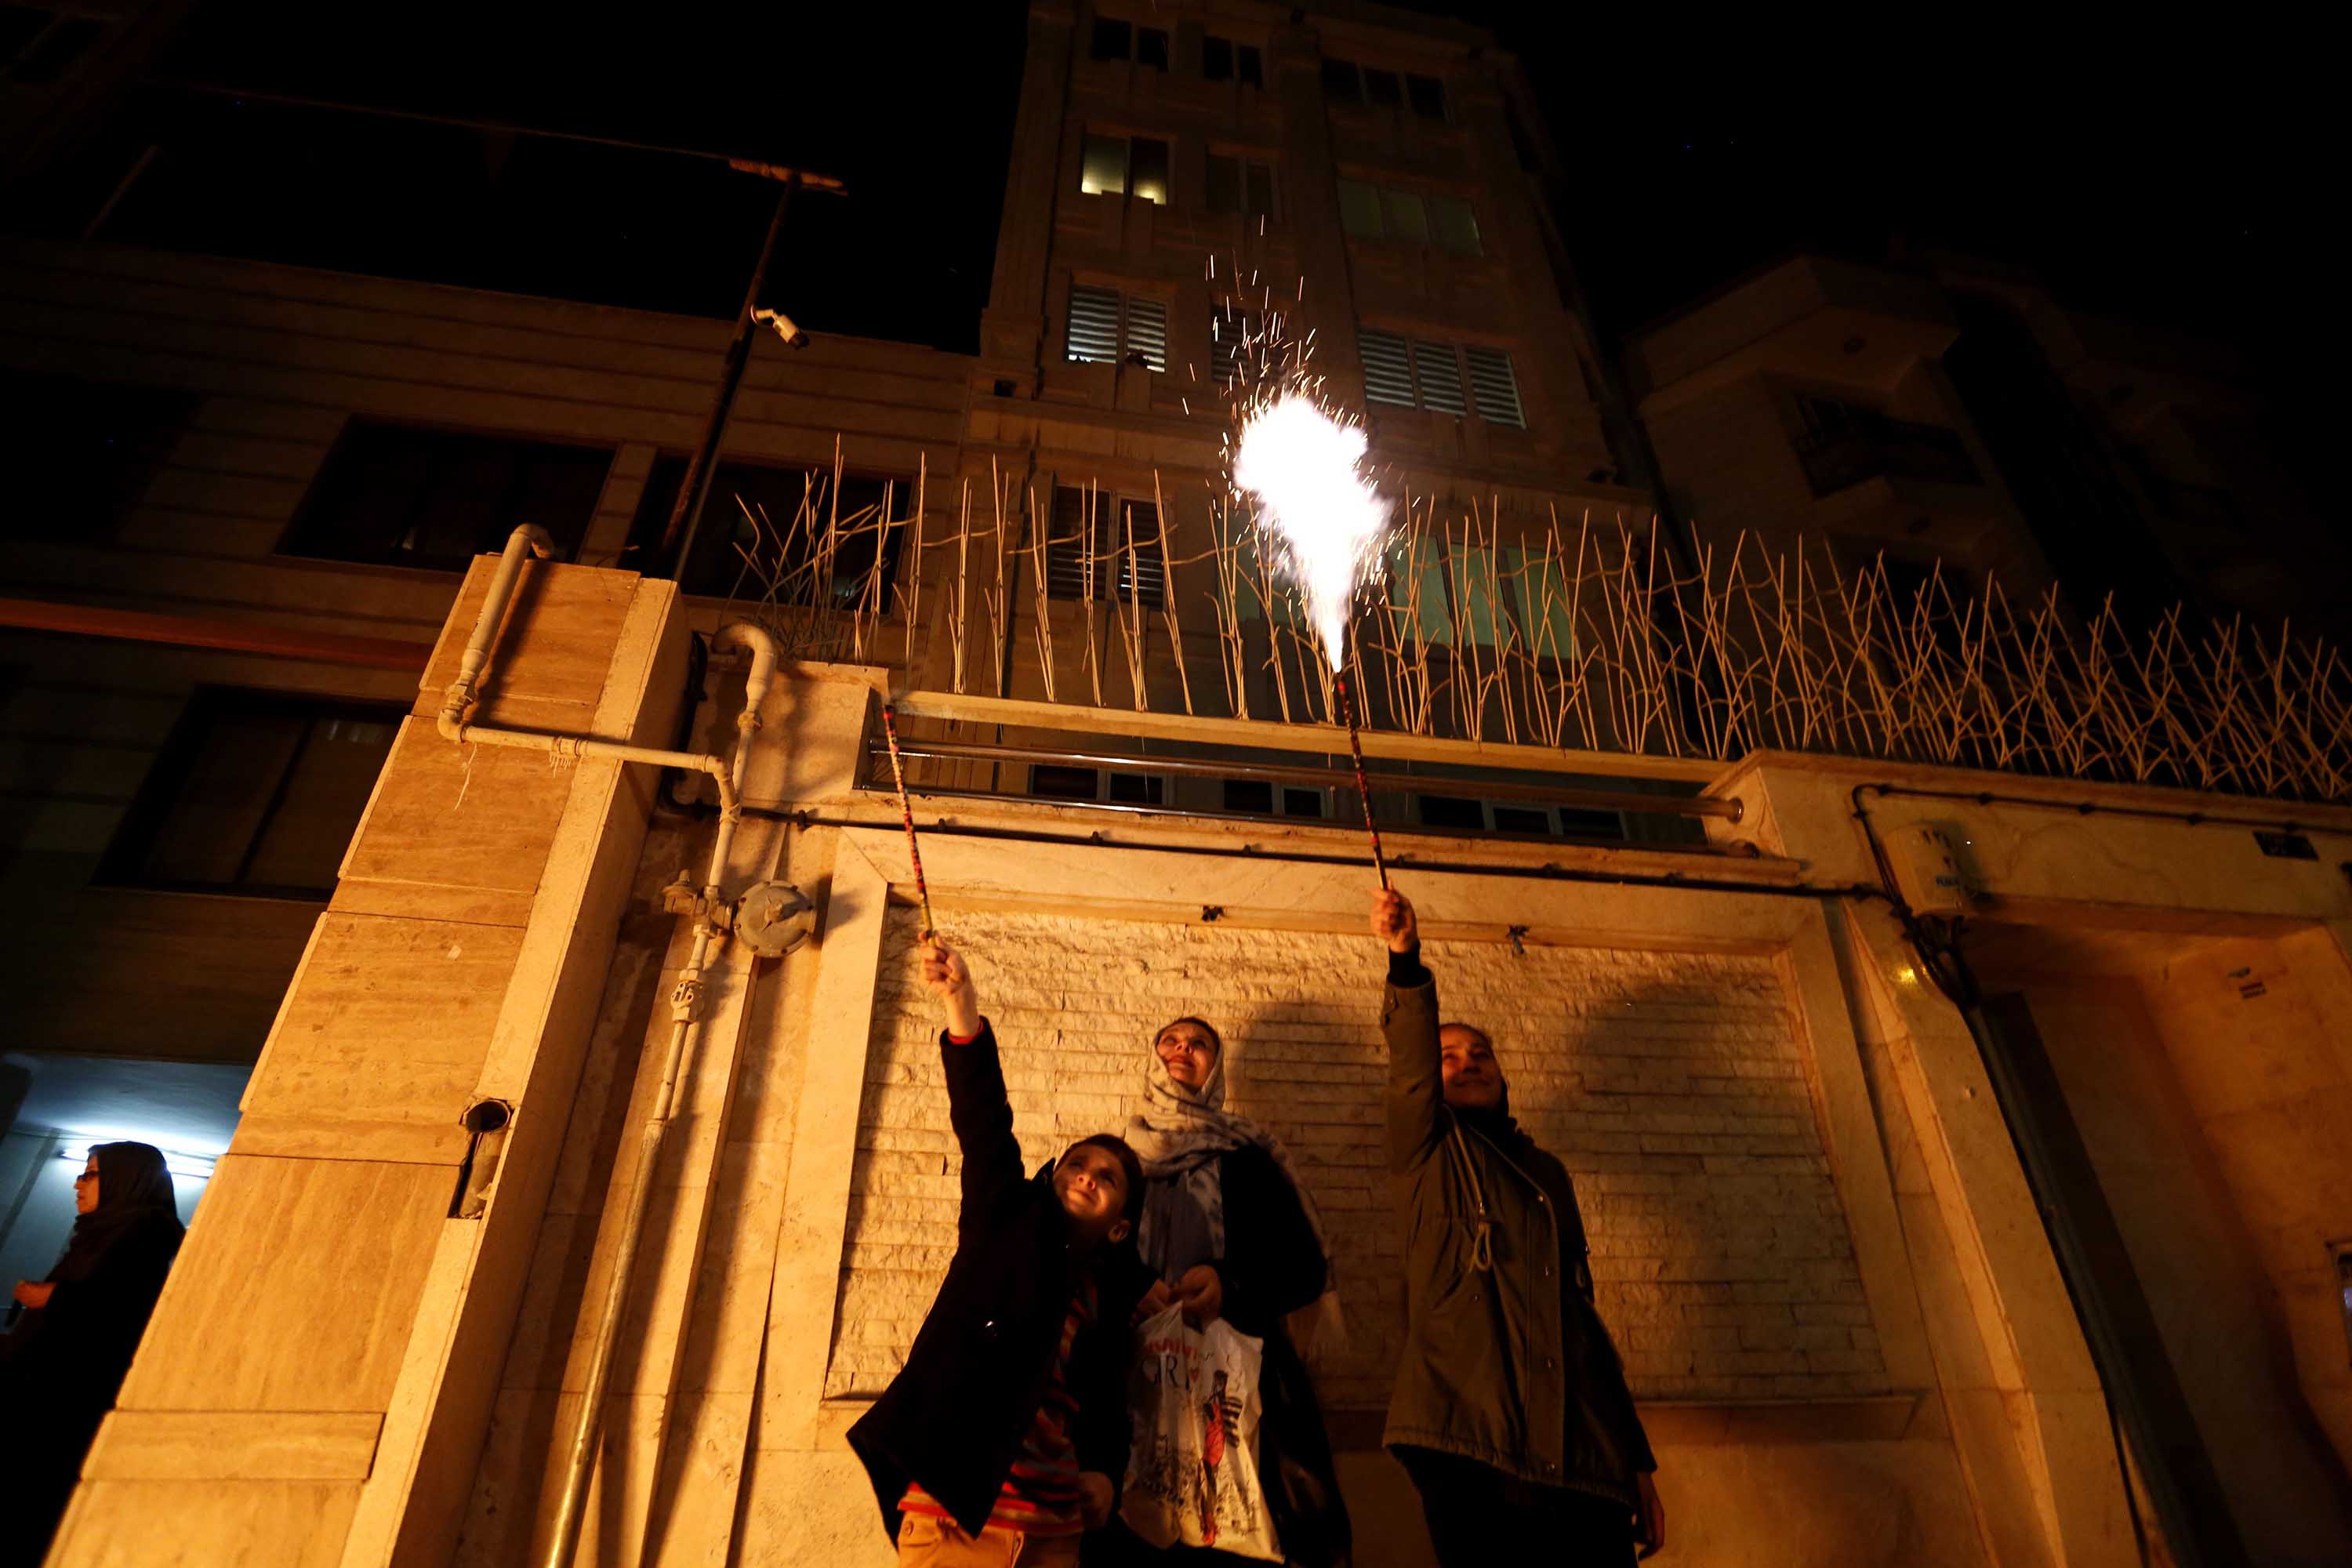 Greeting a New Year with Banging Firecrackers